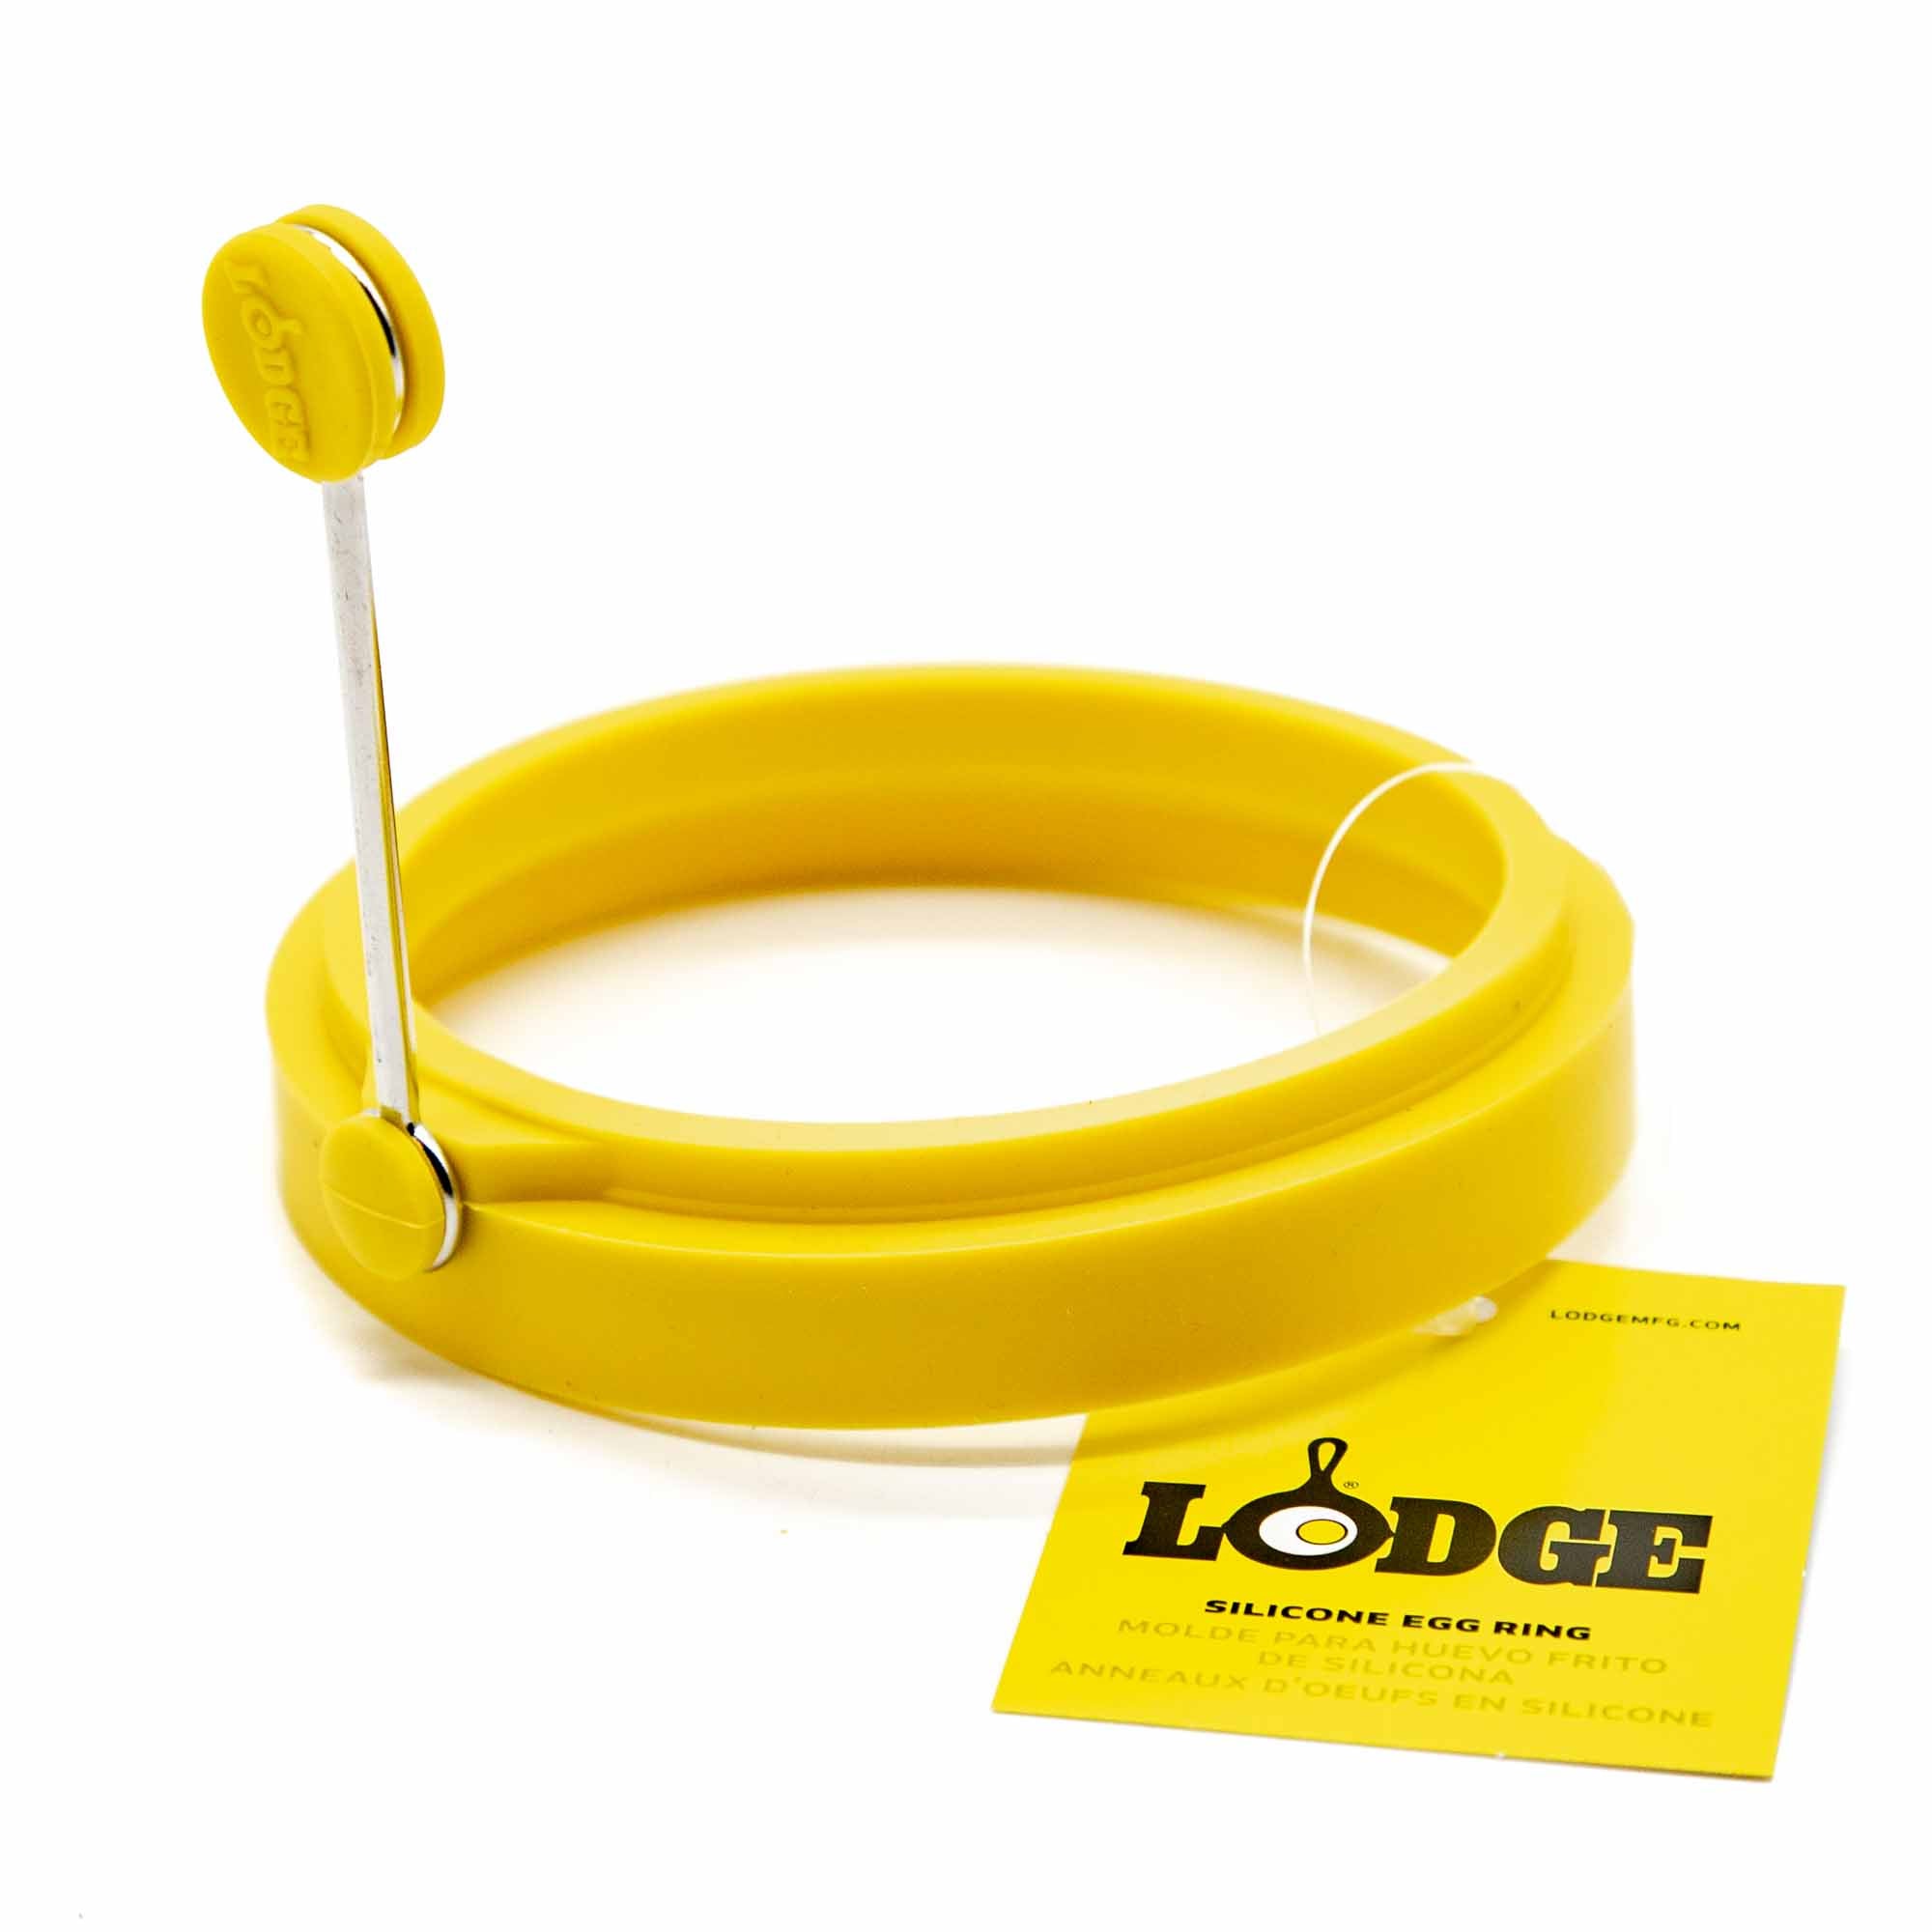 Lodge Silicone Egg Ring, Yellow - Mortise And Tenon